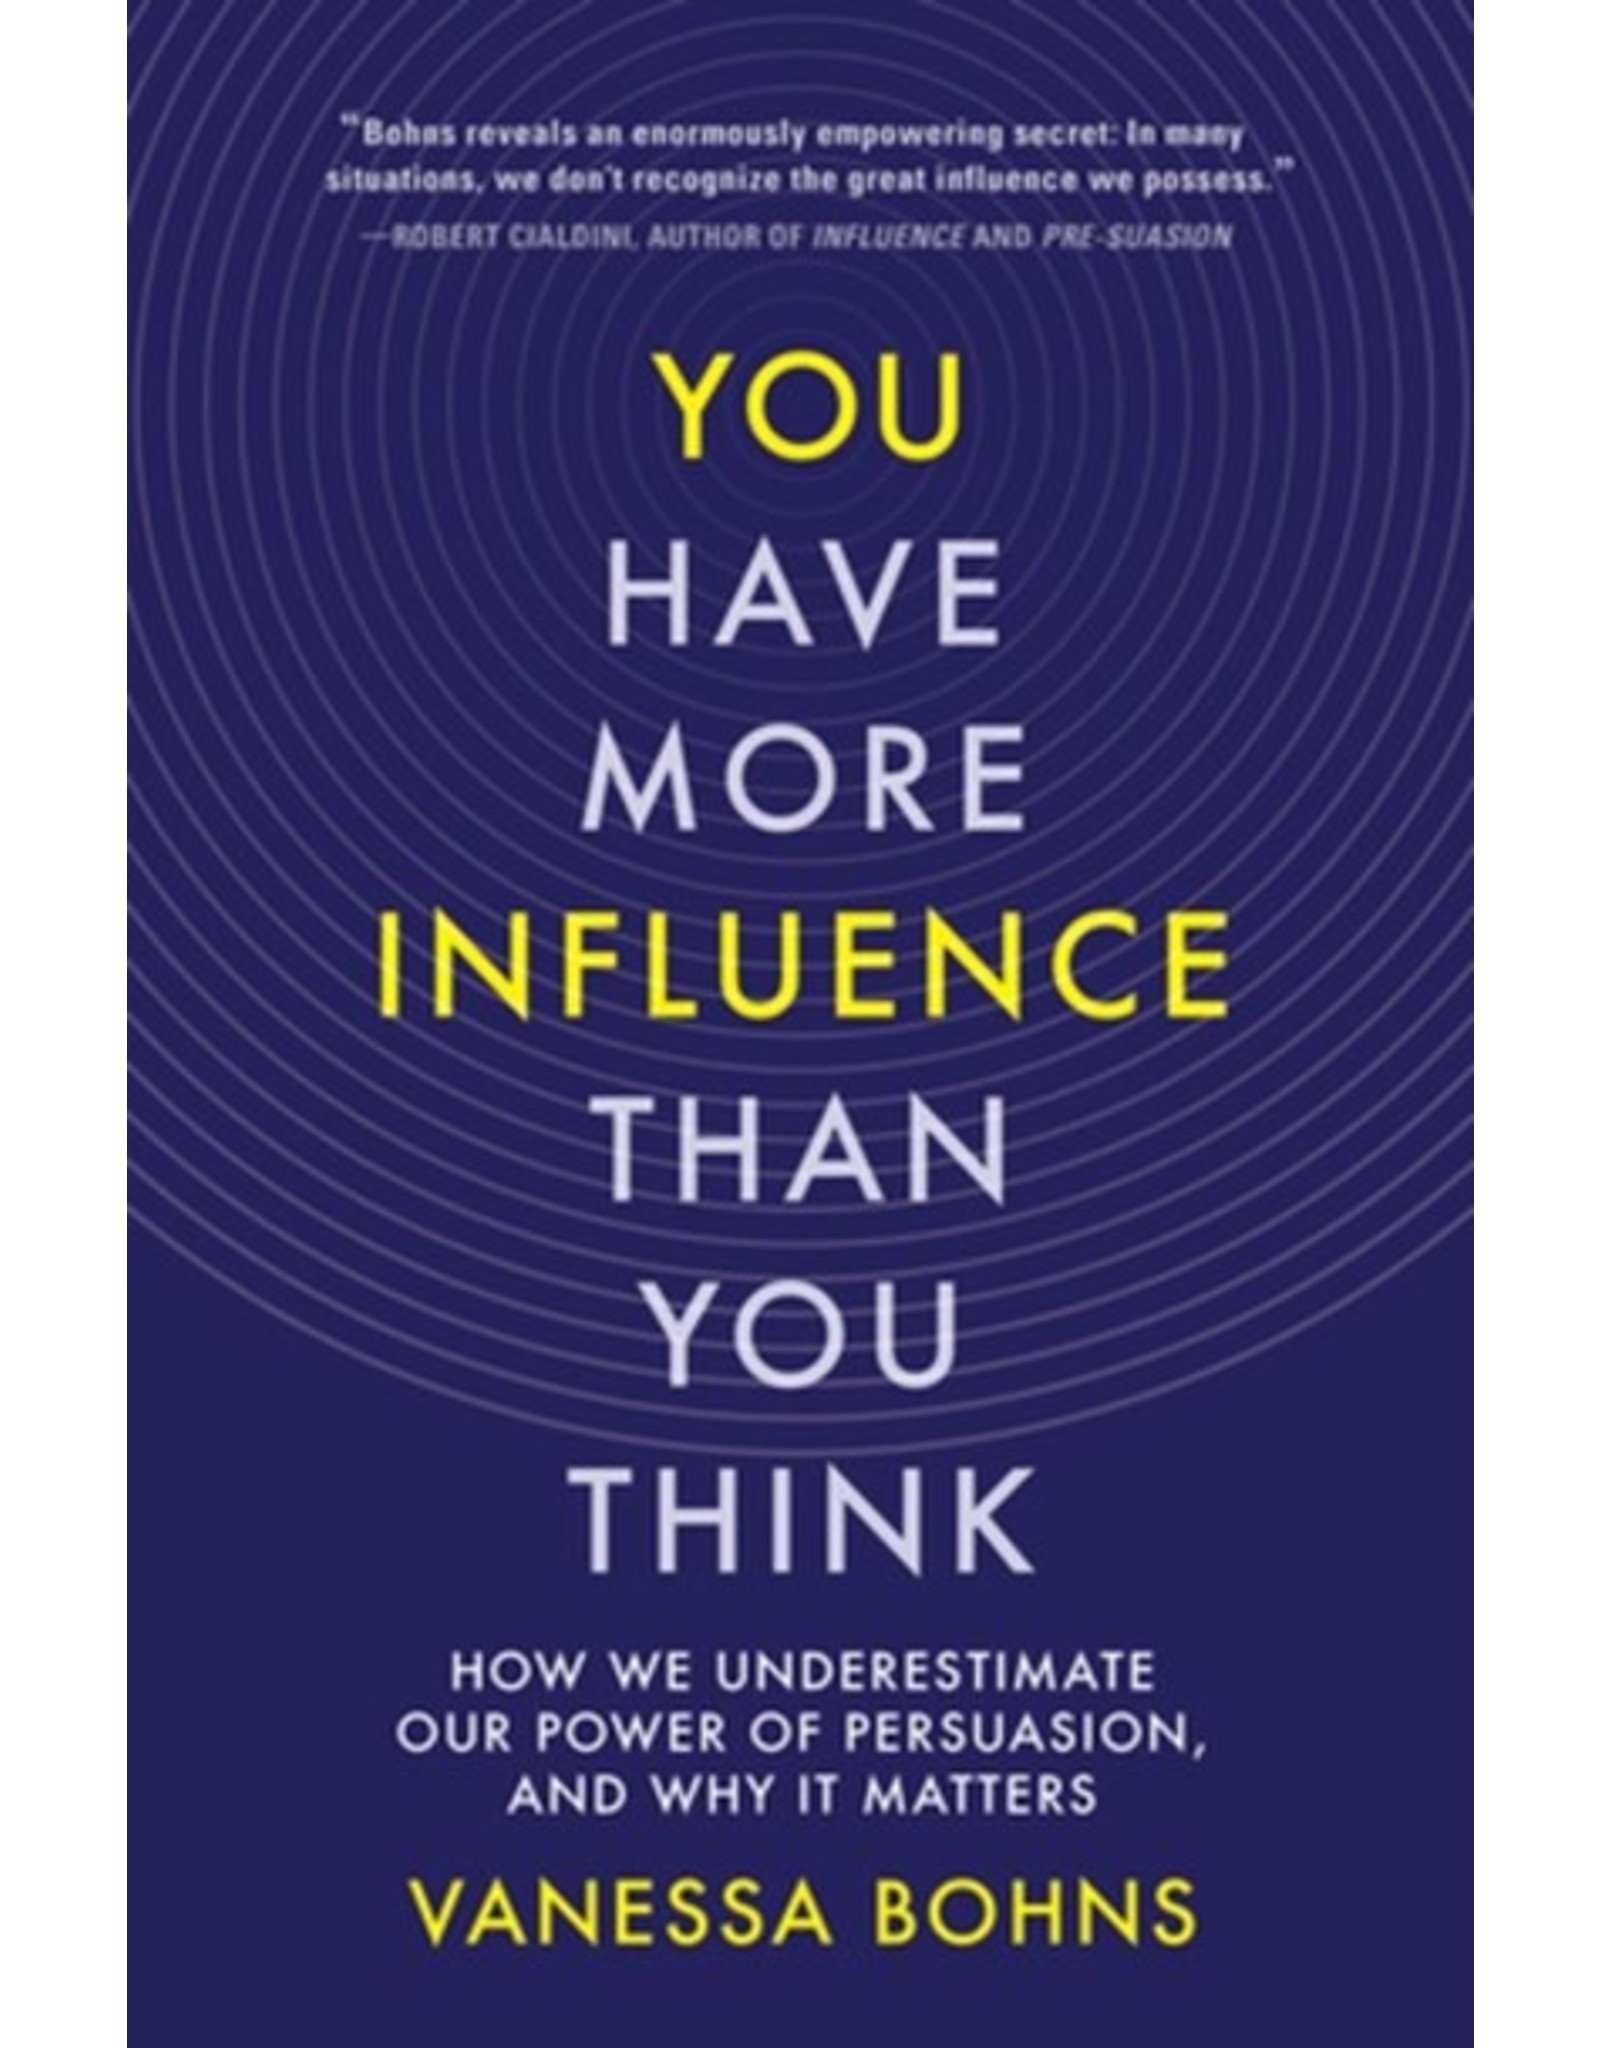 Books You Have More Influence Than YouThink by Vanessa Bohns